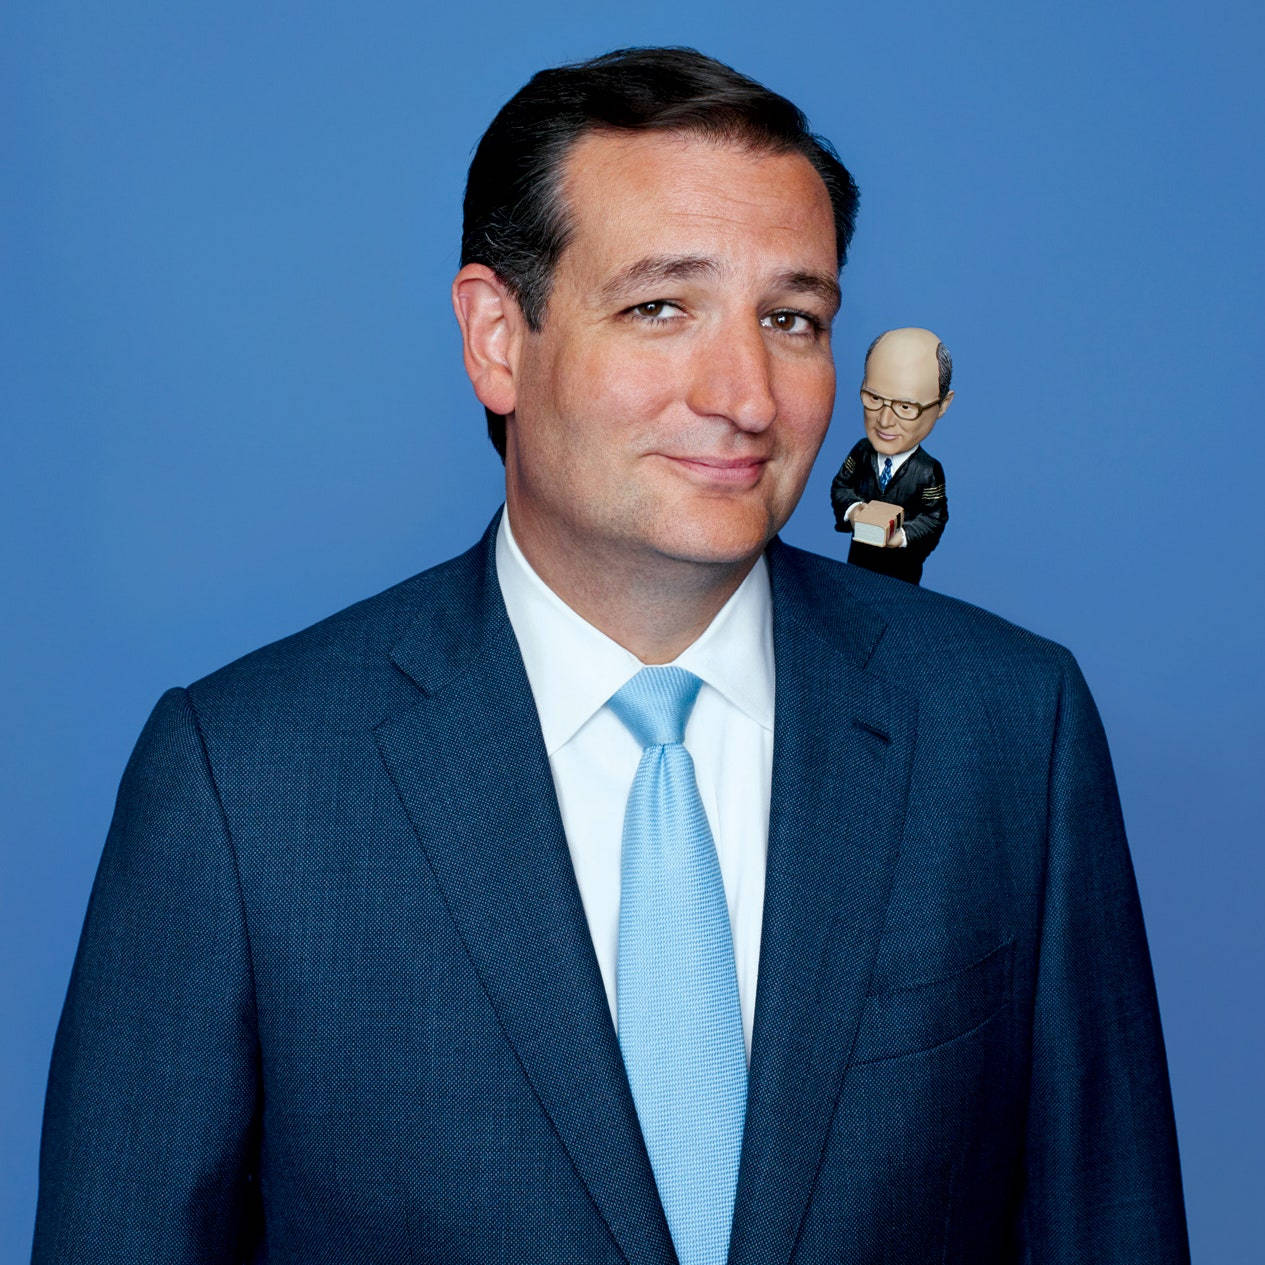 Ted Cruz With A Miniature Toy Wallpaper